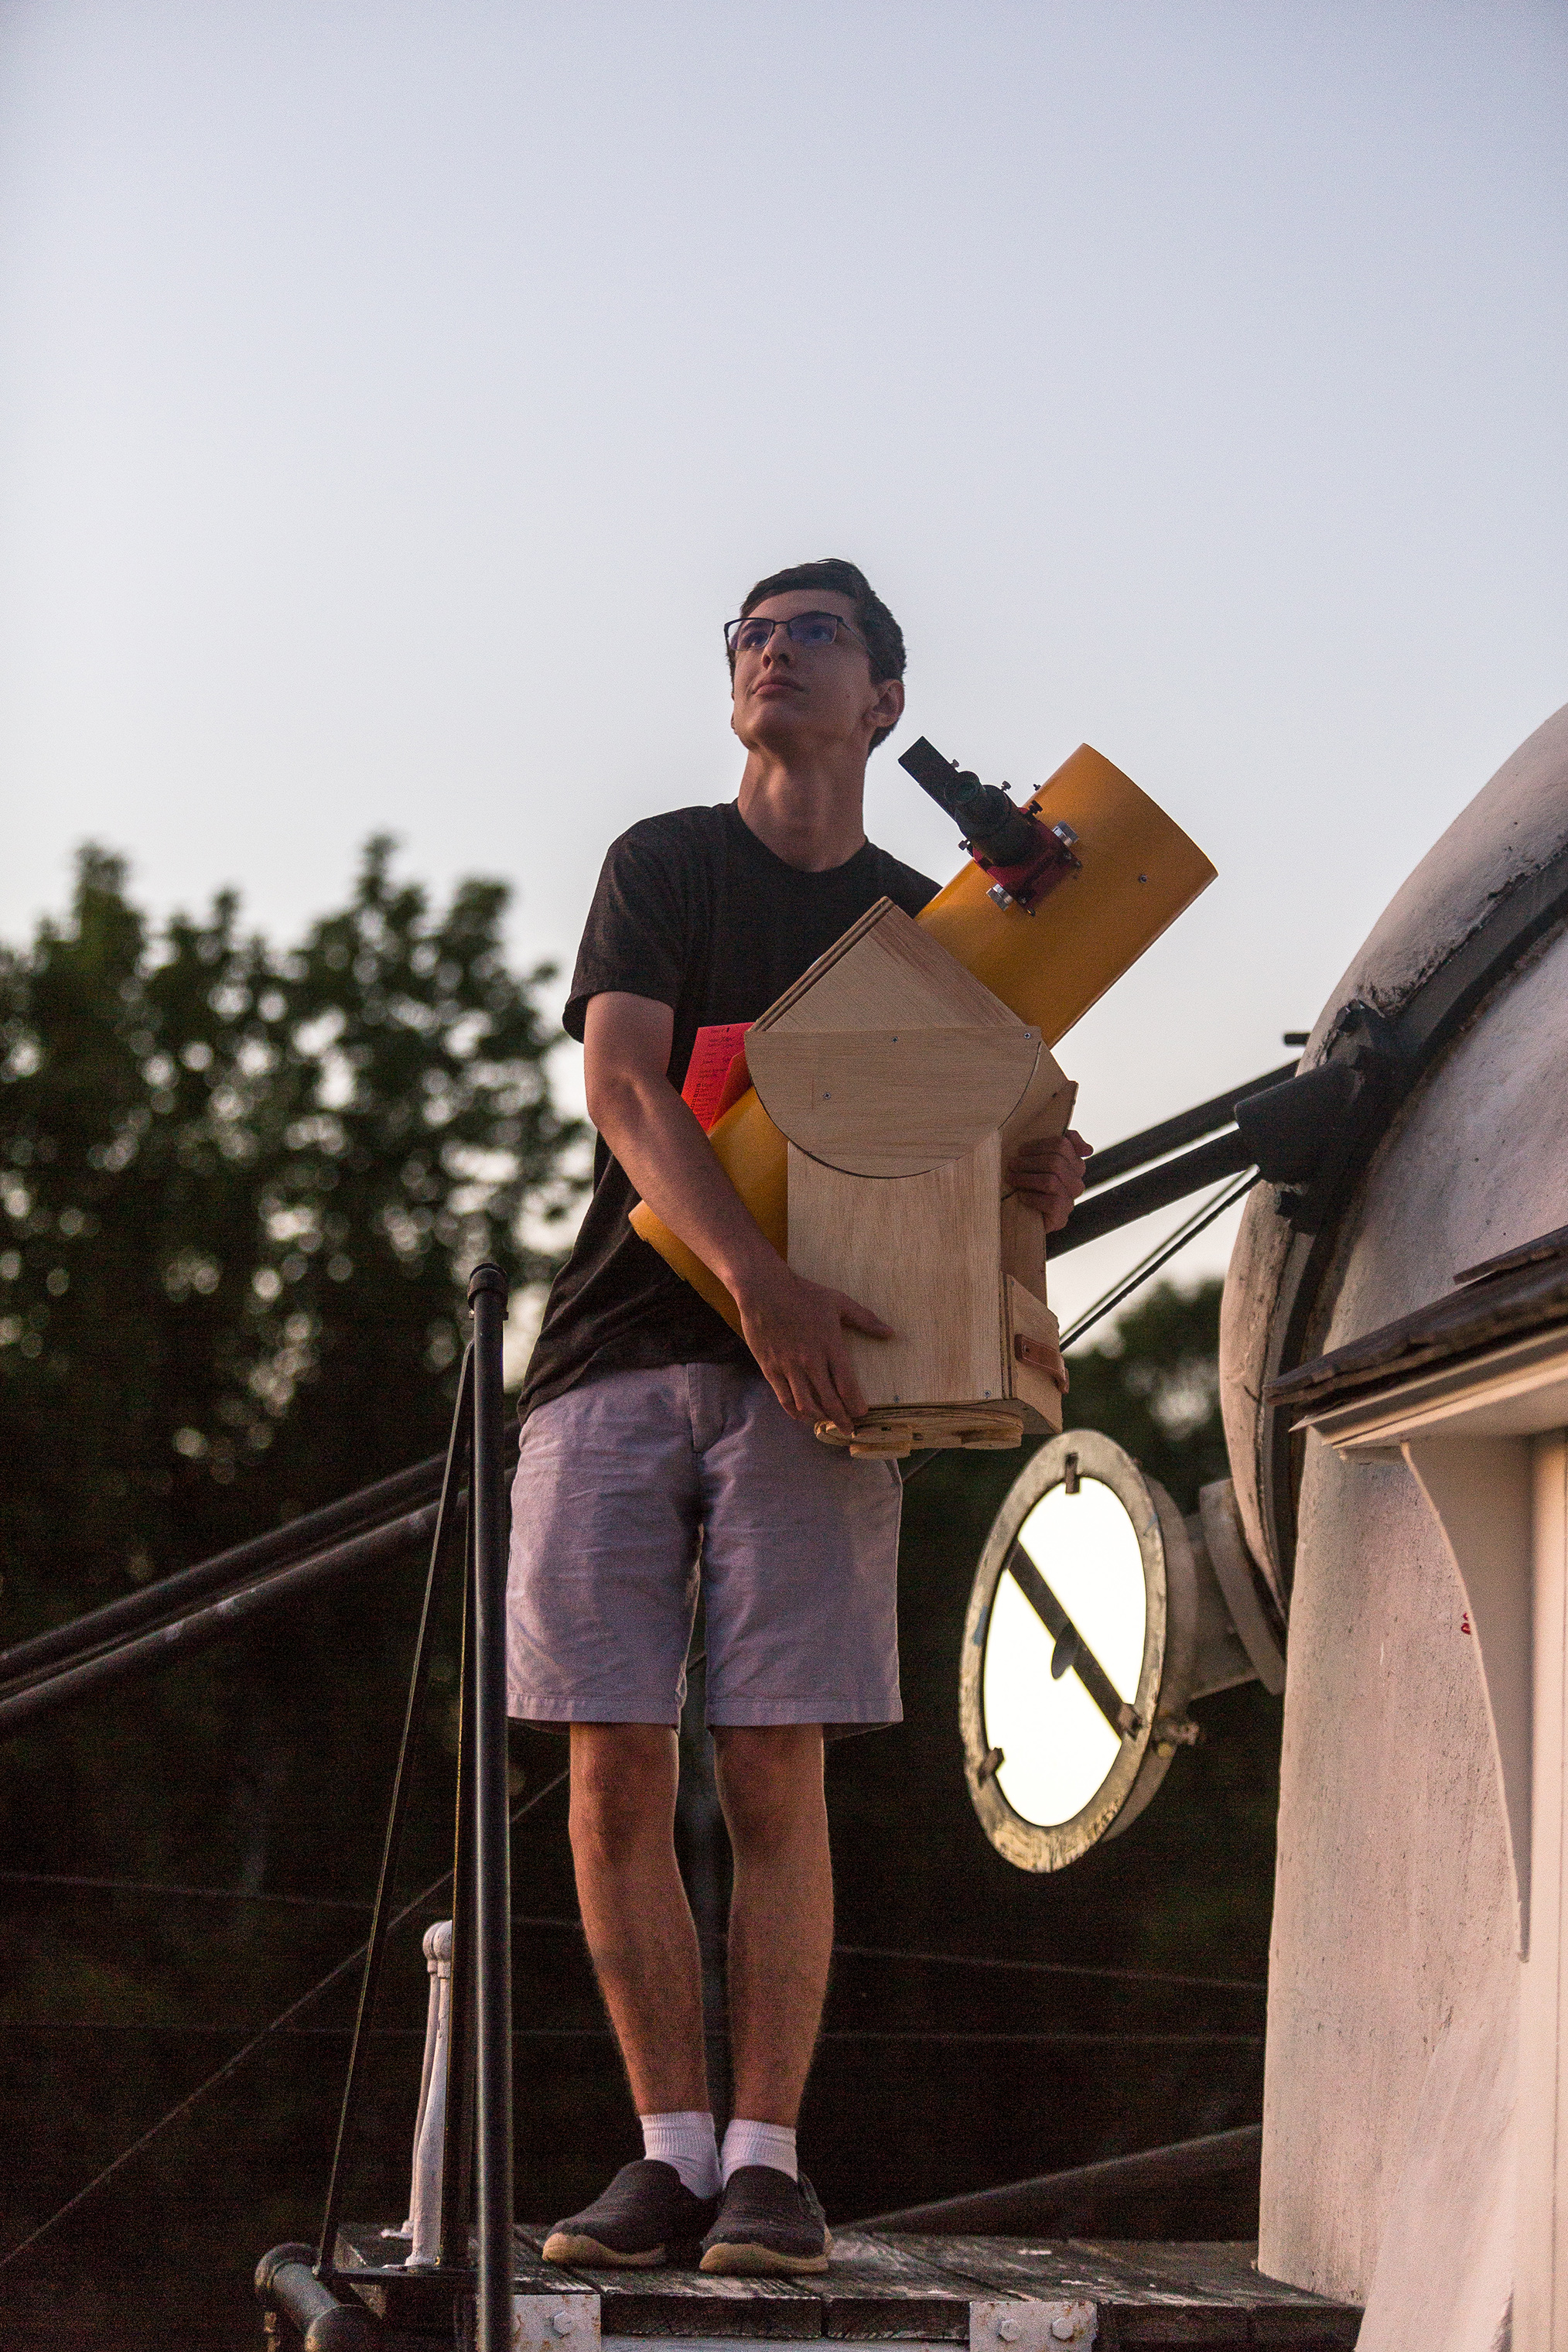 Zane Landers, 15, from Connecticut, with one of his home-made telescopes. (Robert Ormerod for TIME)